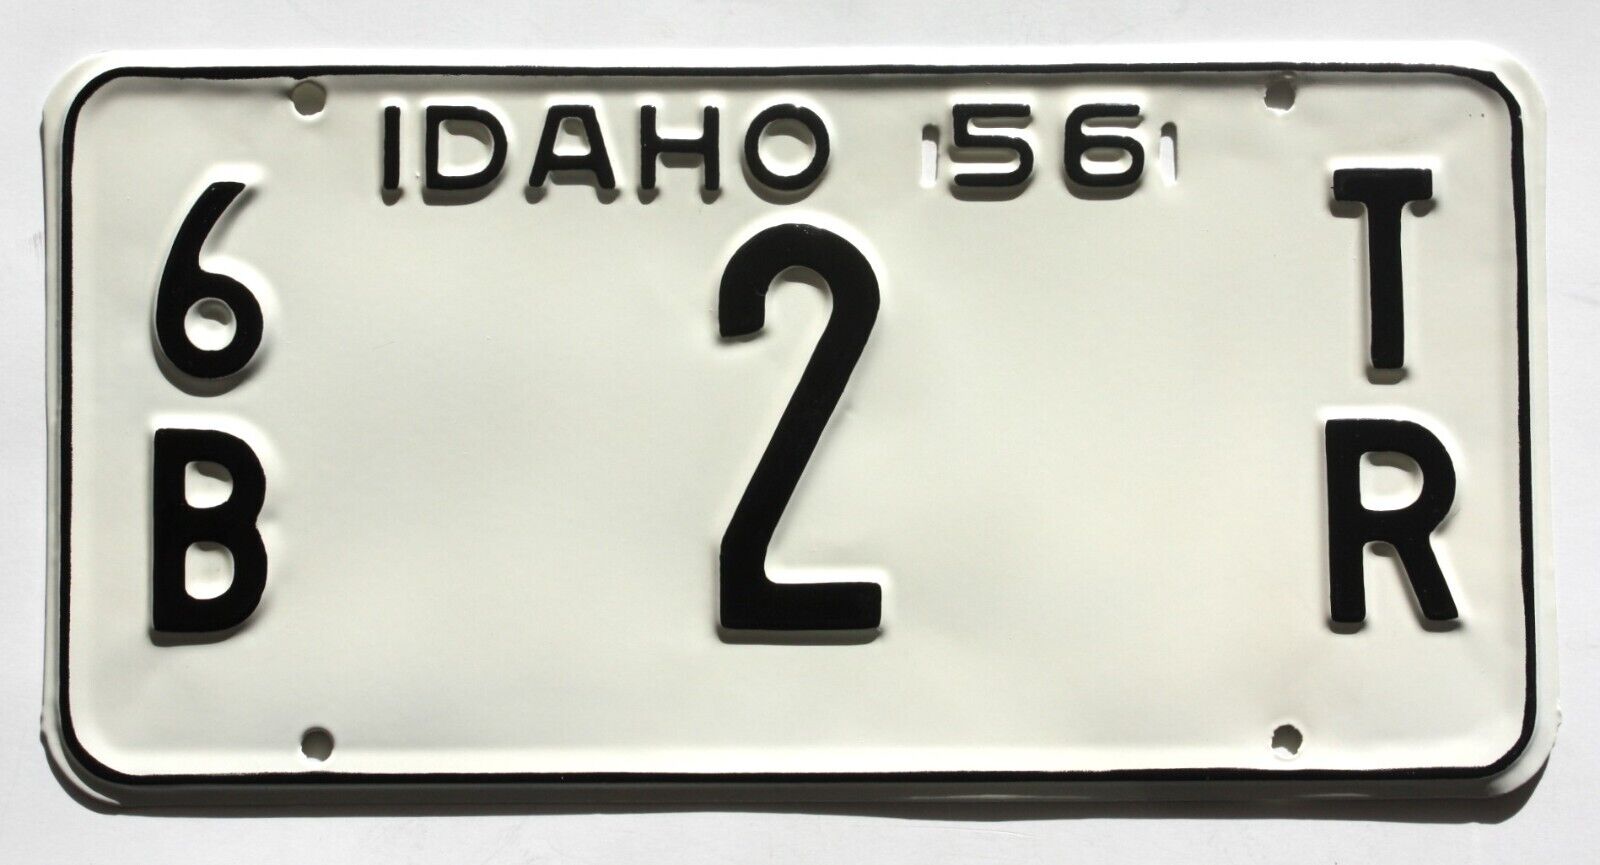 1956 Large Idaho Trailer License Plate #6B 2 TR, Boise Co. Low number Restored